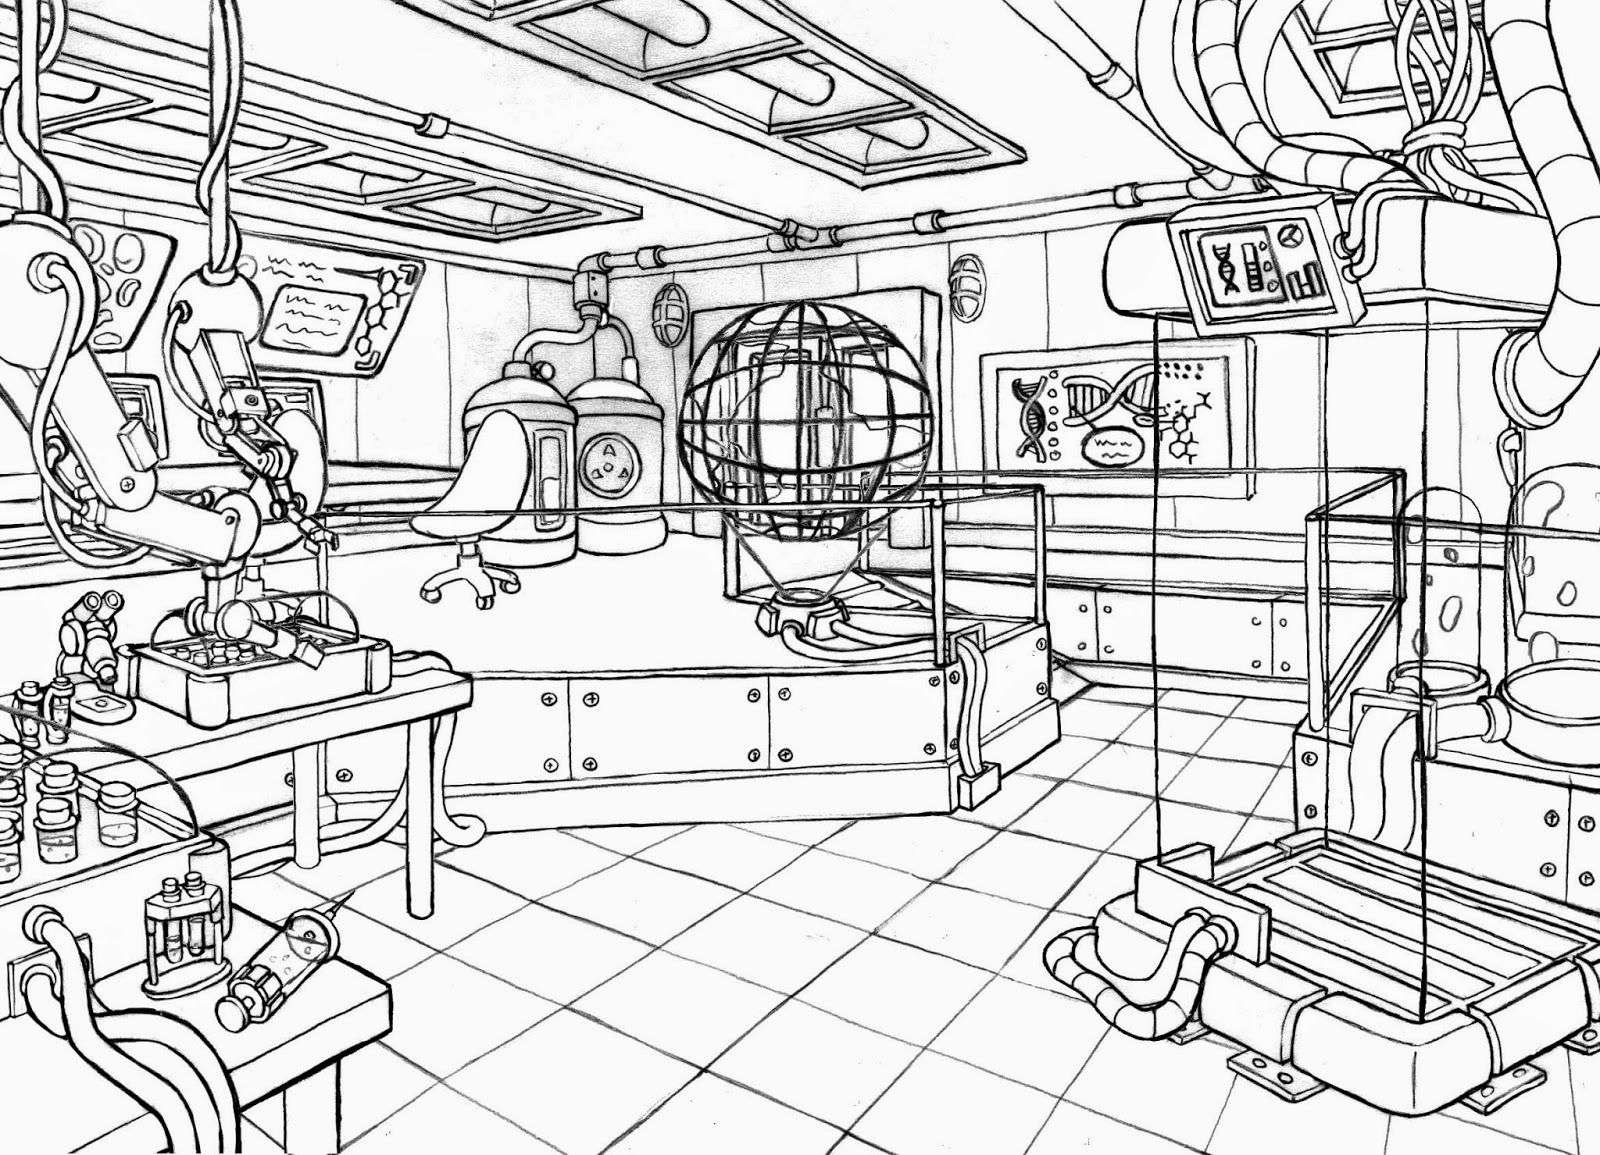 Related Science Lab Coloring Pages, Science Lab